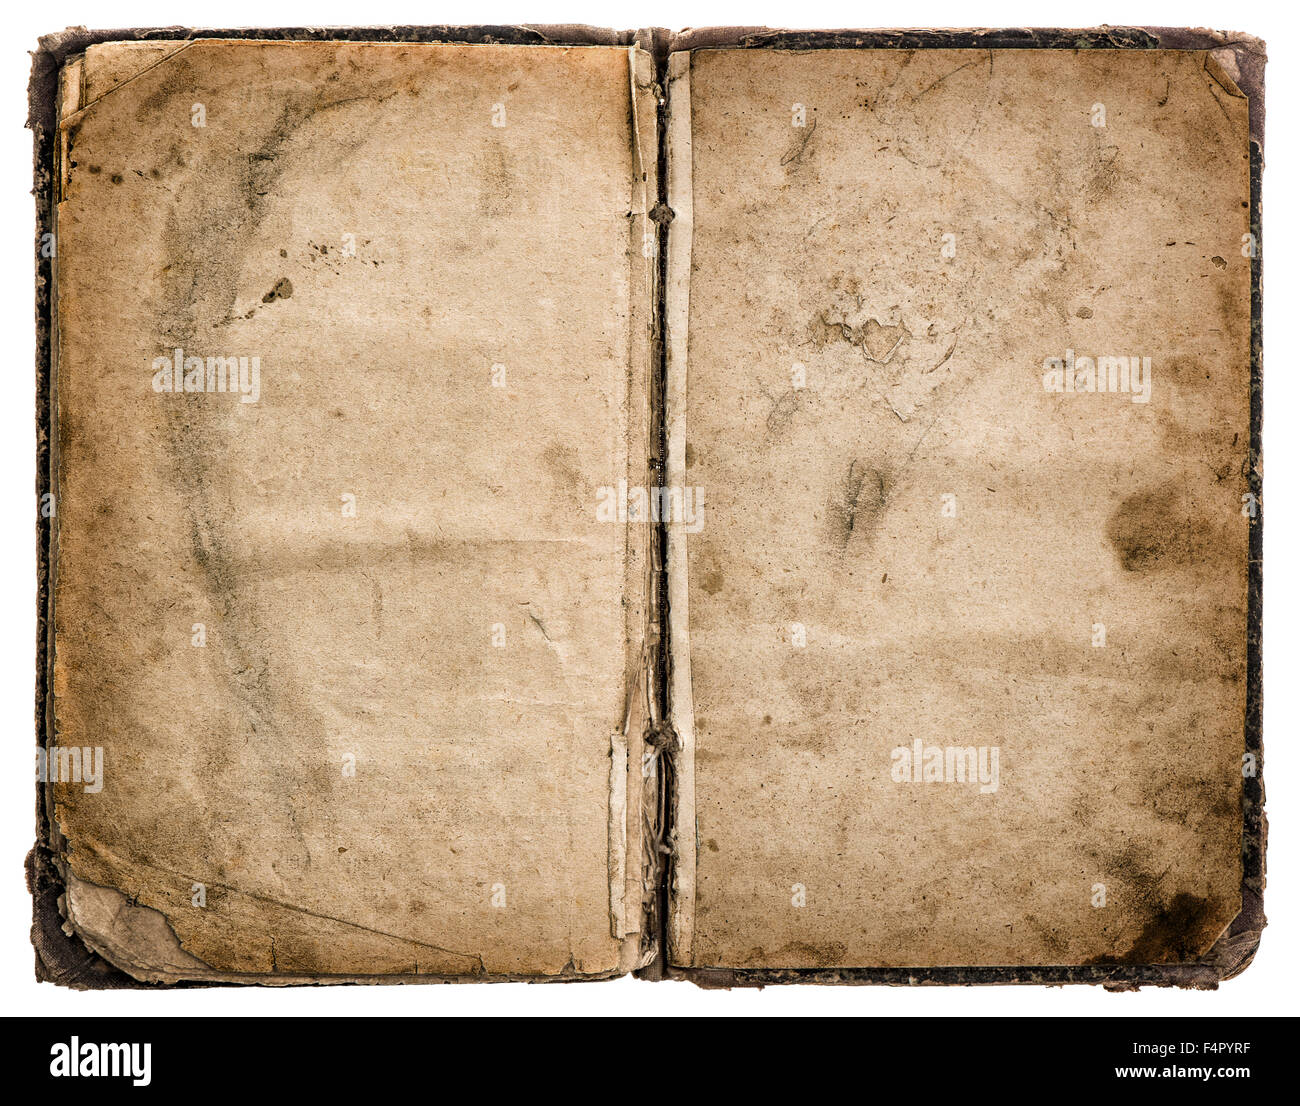 Old book open isolated on white background. Grungy worn paper texture Stock Photo